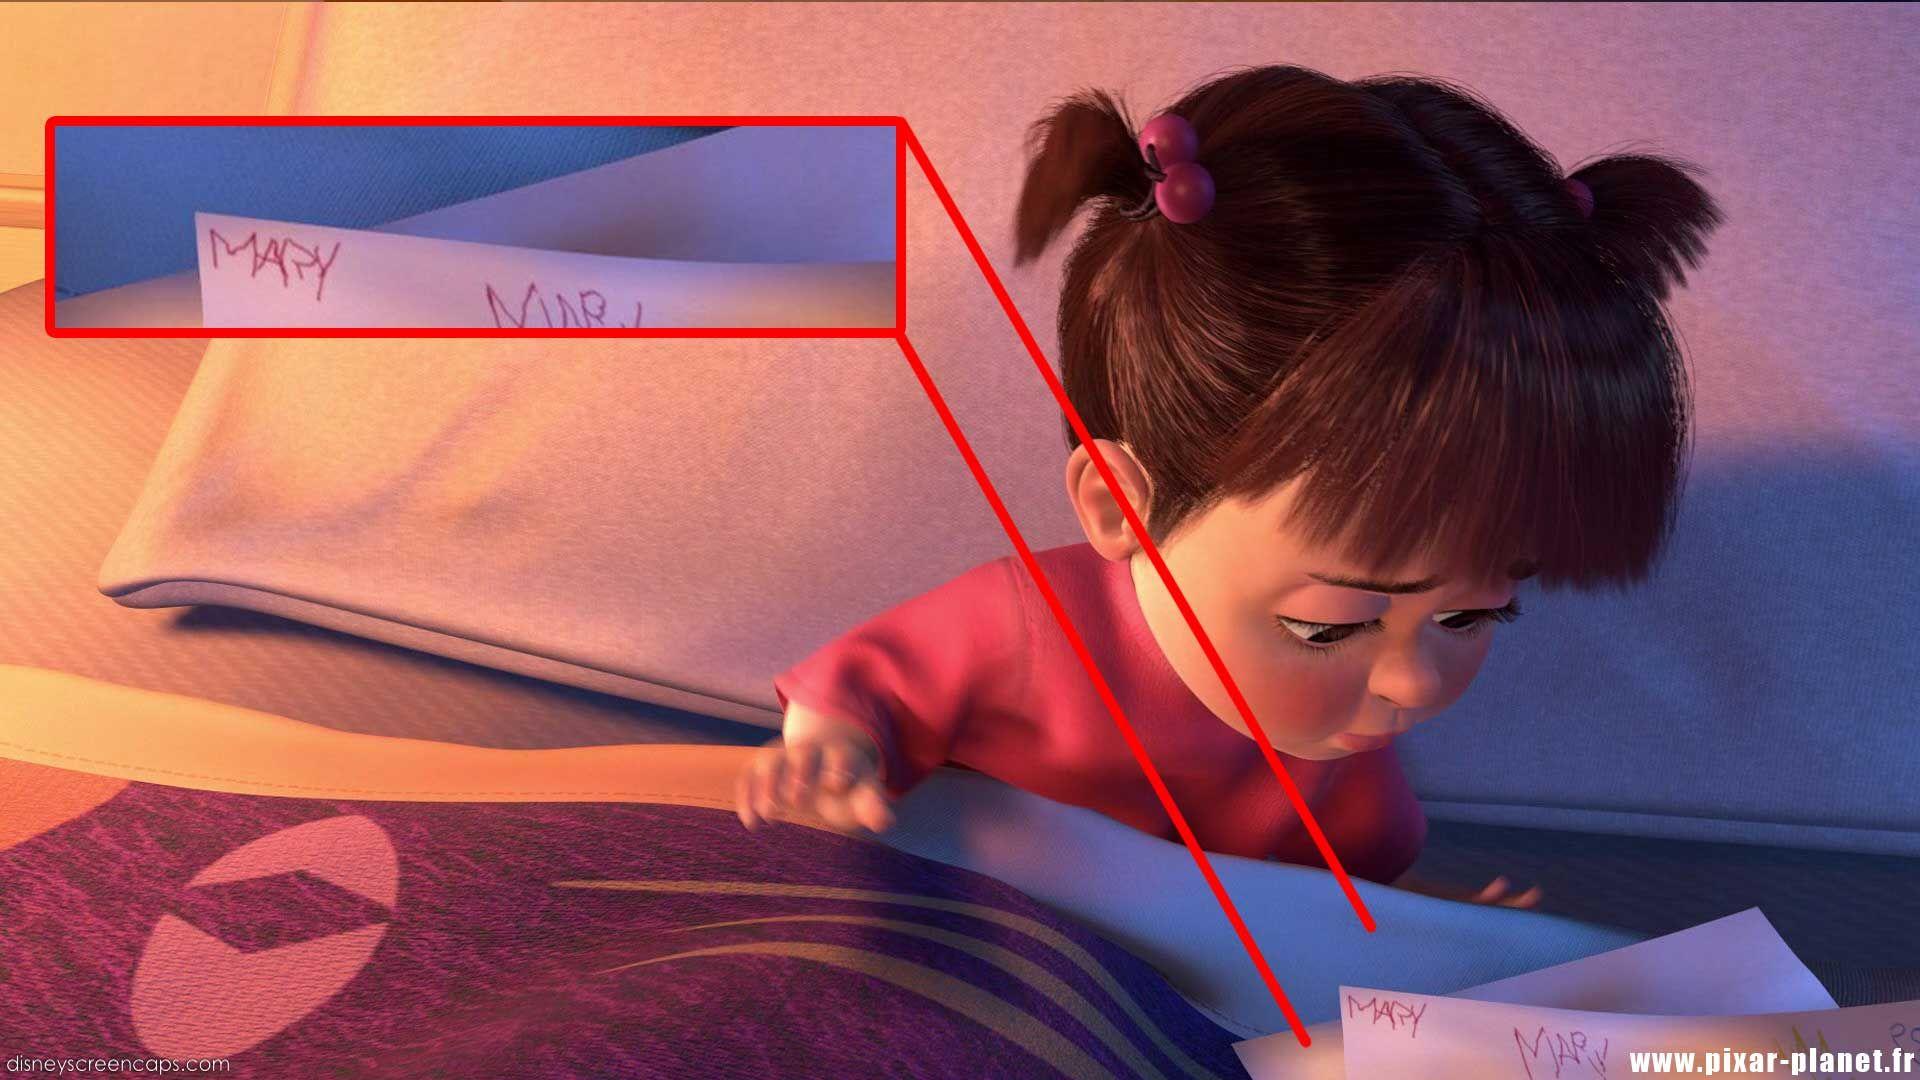 Monsters Inc Hidden Drawing Where Does Boo From Monsters Inc. Live.